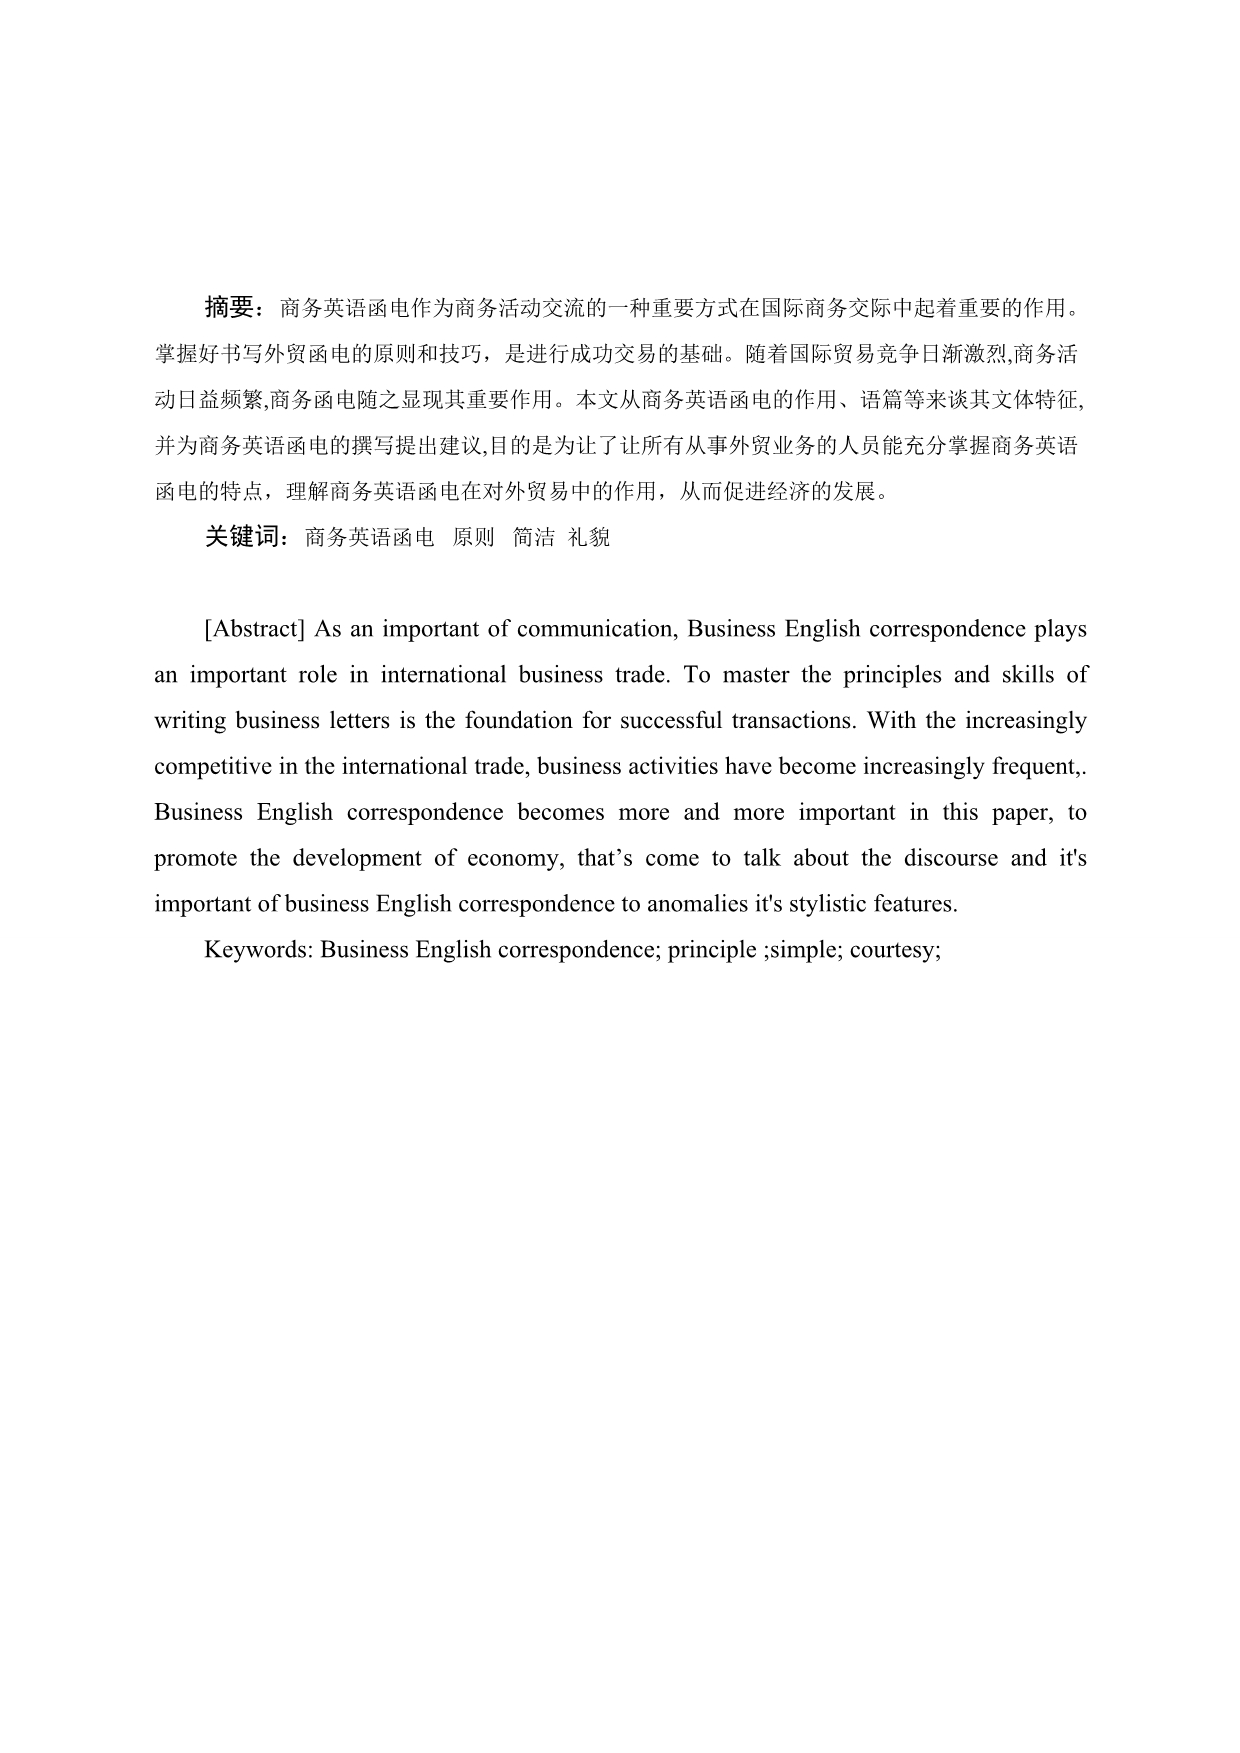 Business English Correspondence in the Role of Foreign Trade 英语专业毕业论文.doc_第2页